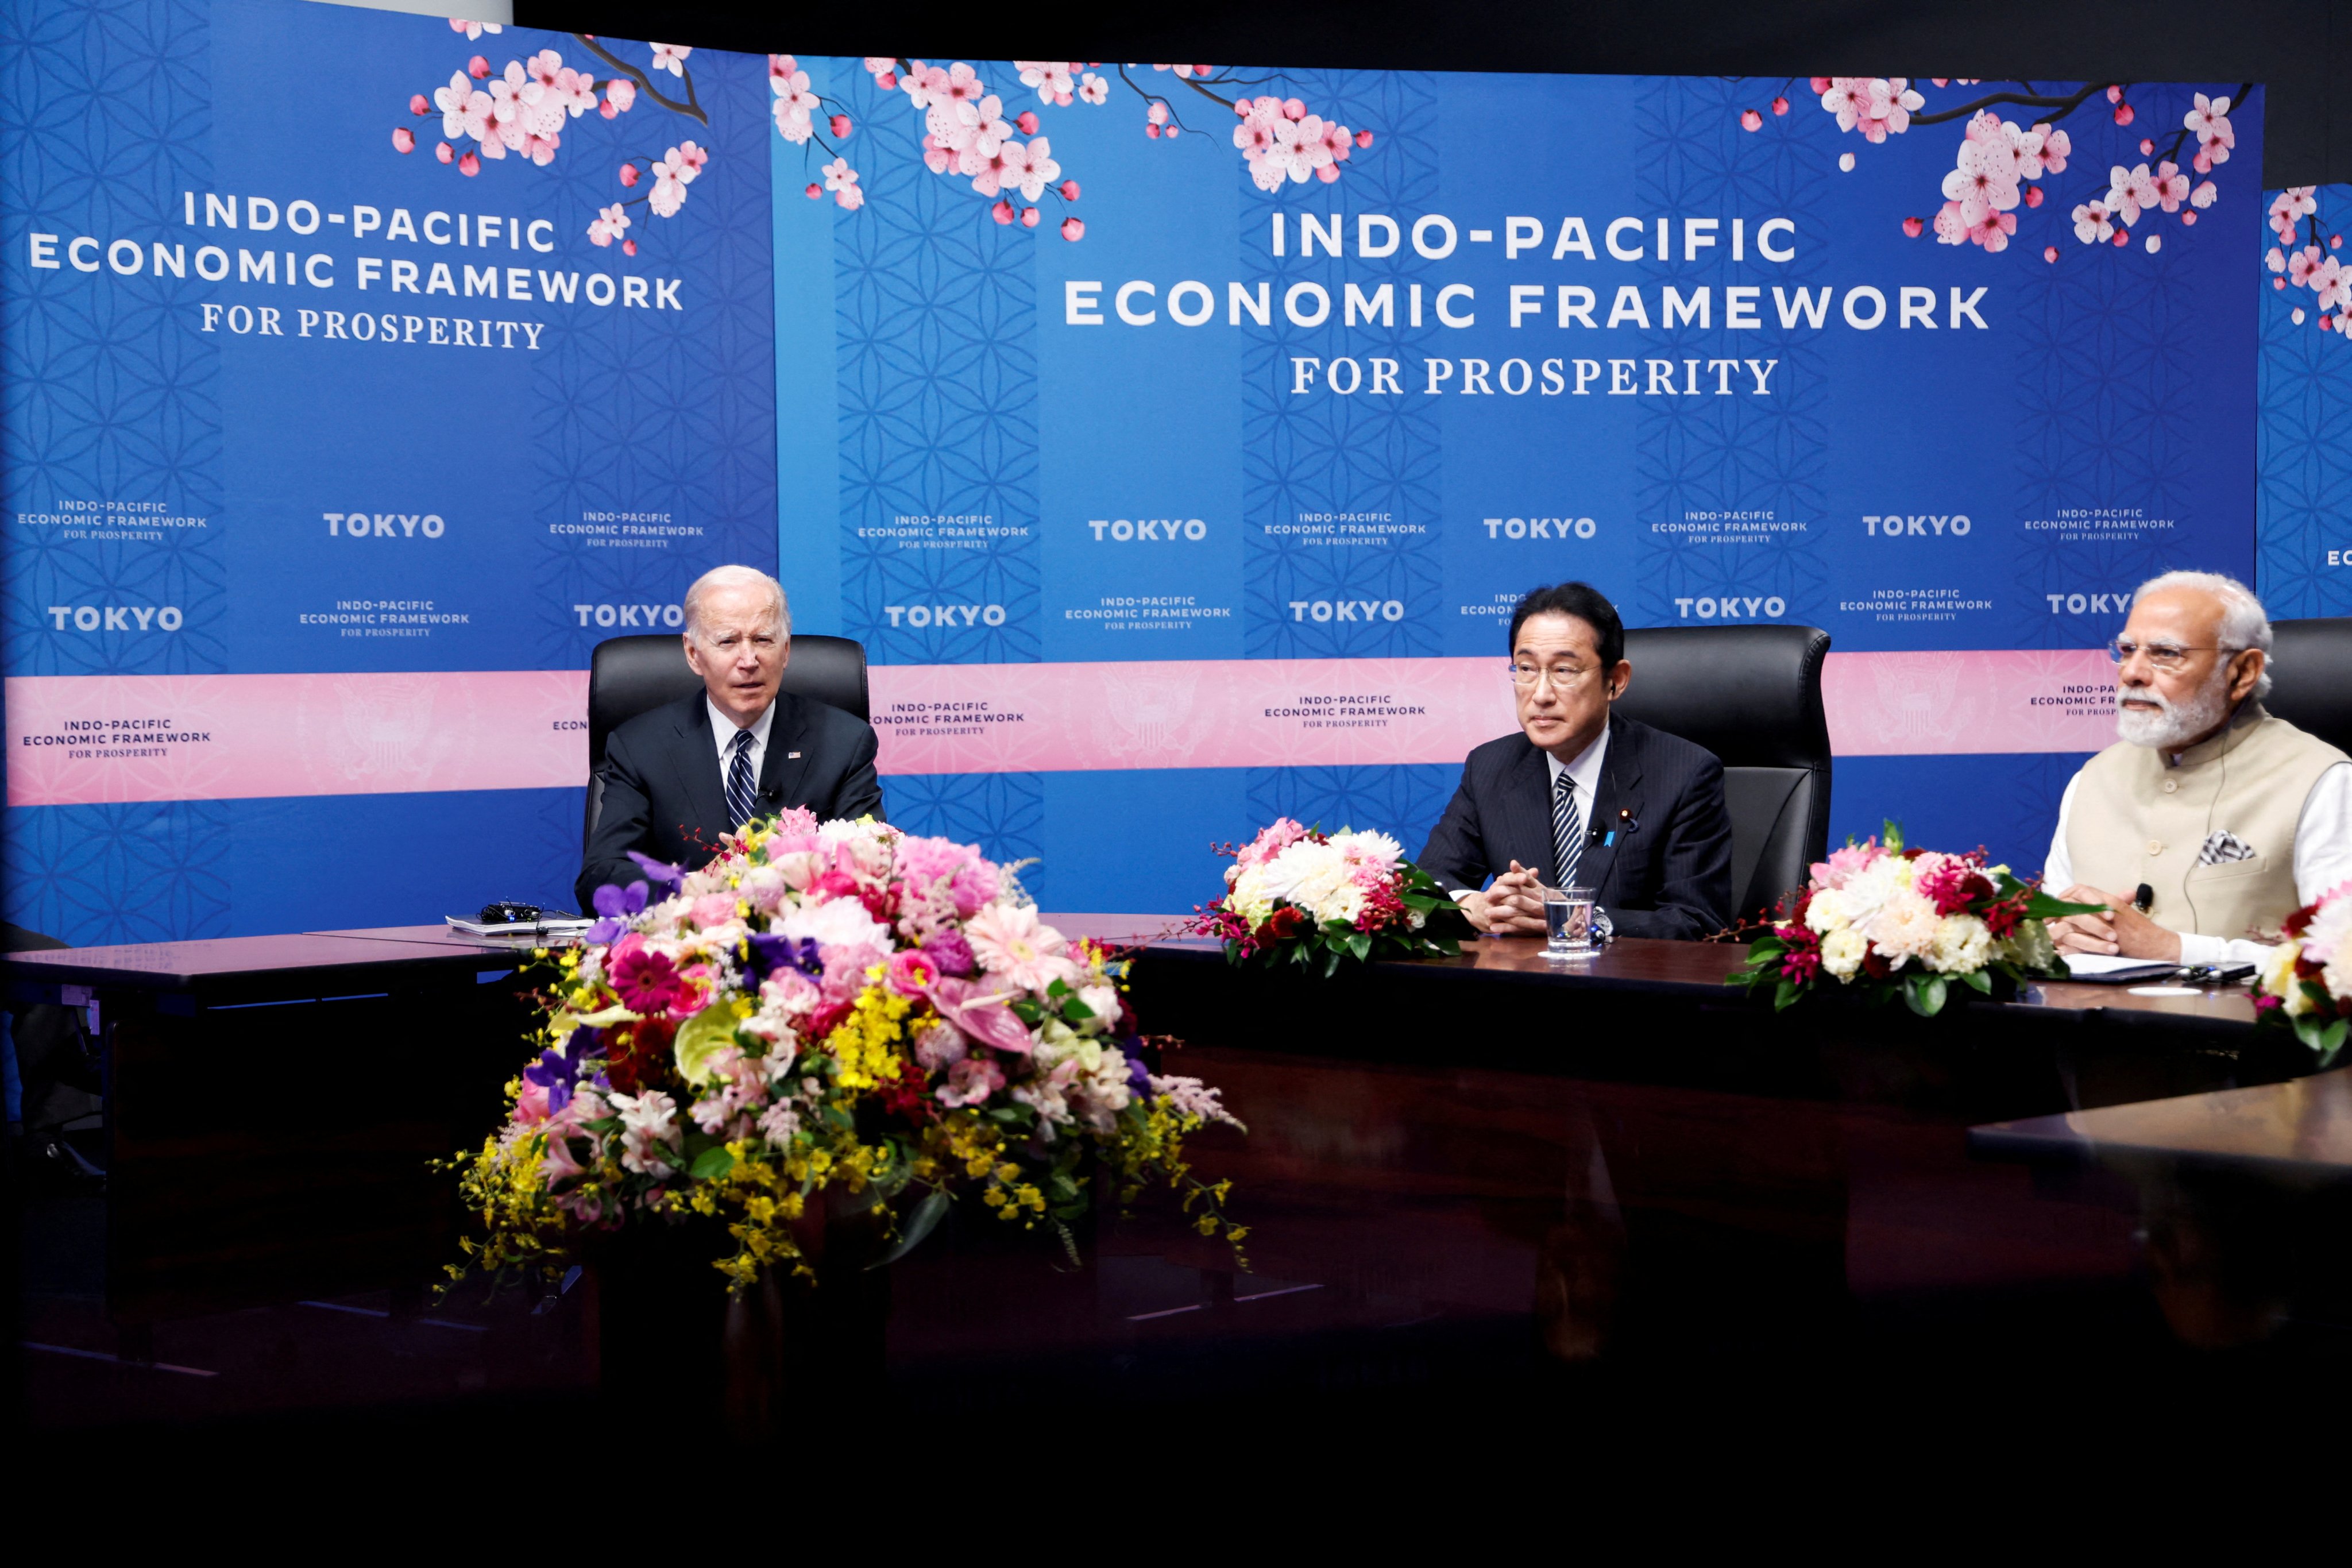 US President Joe Biden delivers remarks alongside Japanese Prime Minister Fumio Kishida and Indian Prime Minister Narendra Modi during the Indo-Pacific Economic Framework for Prosperity launch event in Tokyo on May 23, 2022. Photo: Reuters